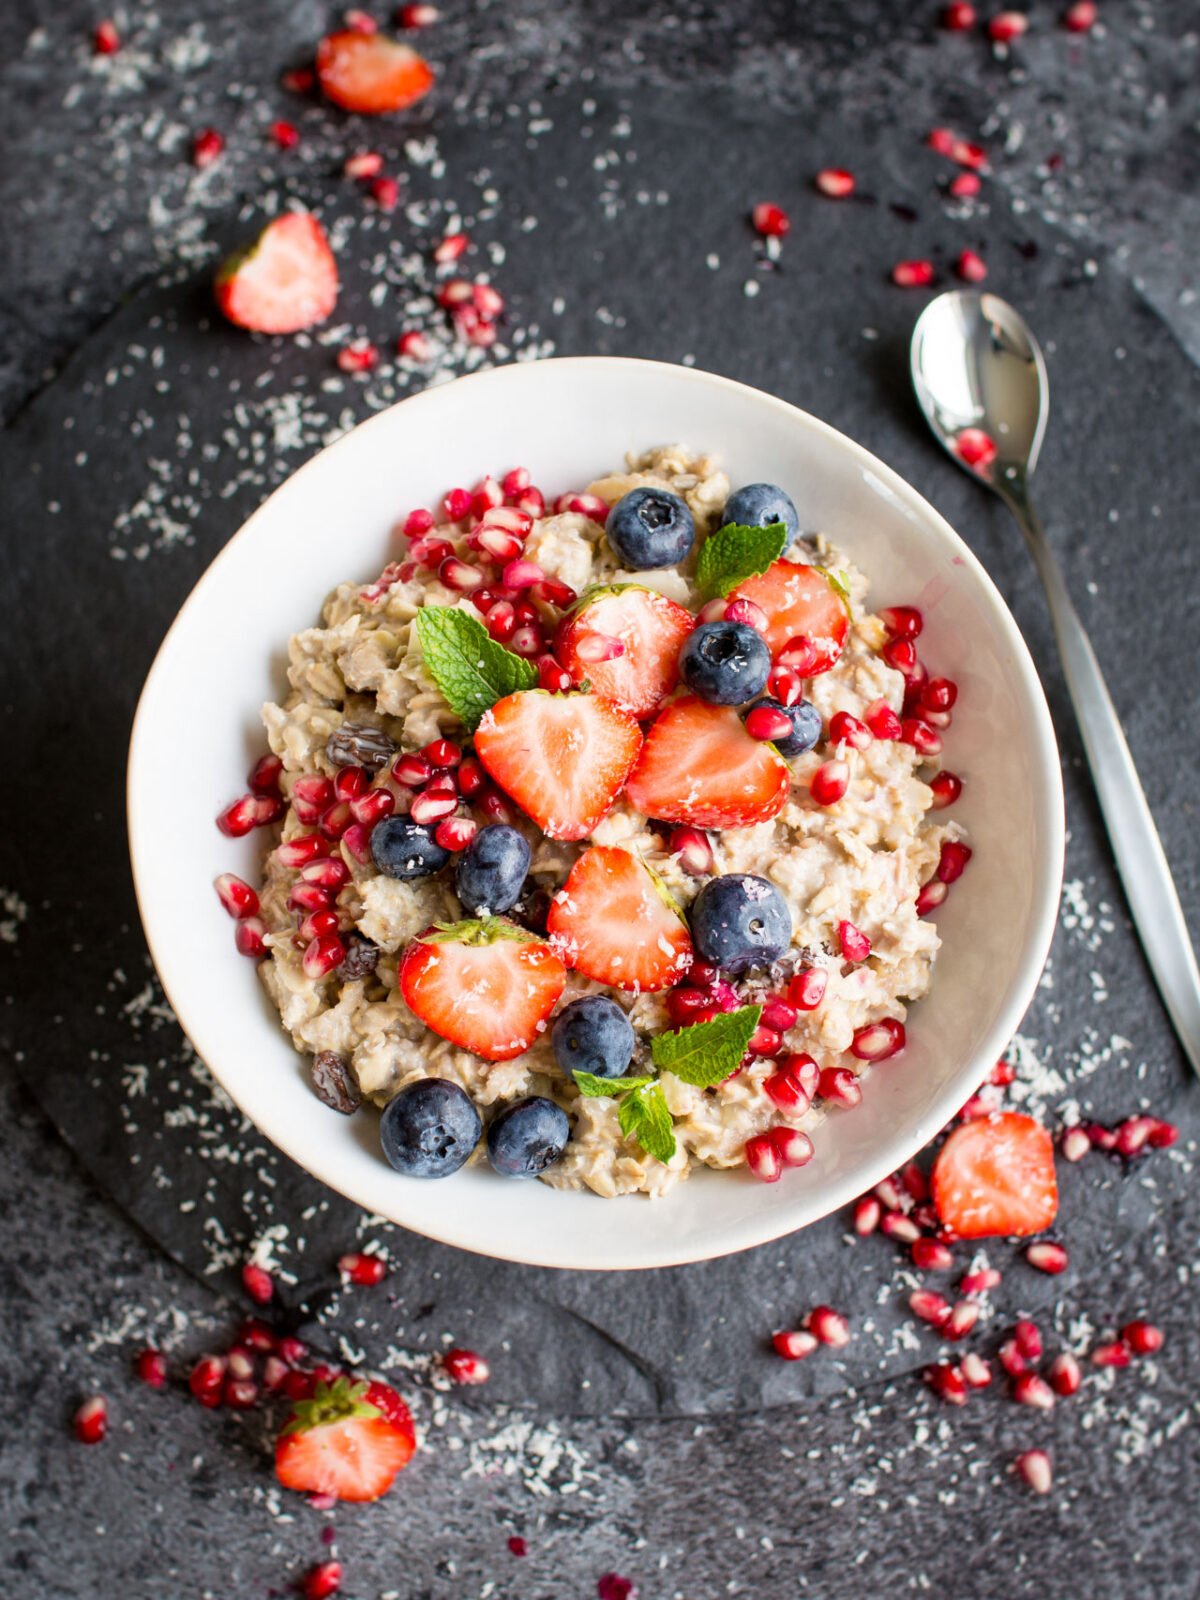 Vegan Bircher Muesli is a great, delicious and nutritious start to your day. Great for preparing in advance, this simple breakfast is great for those mornings you are on the go!